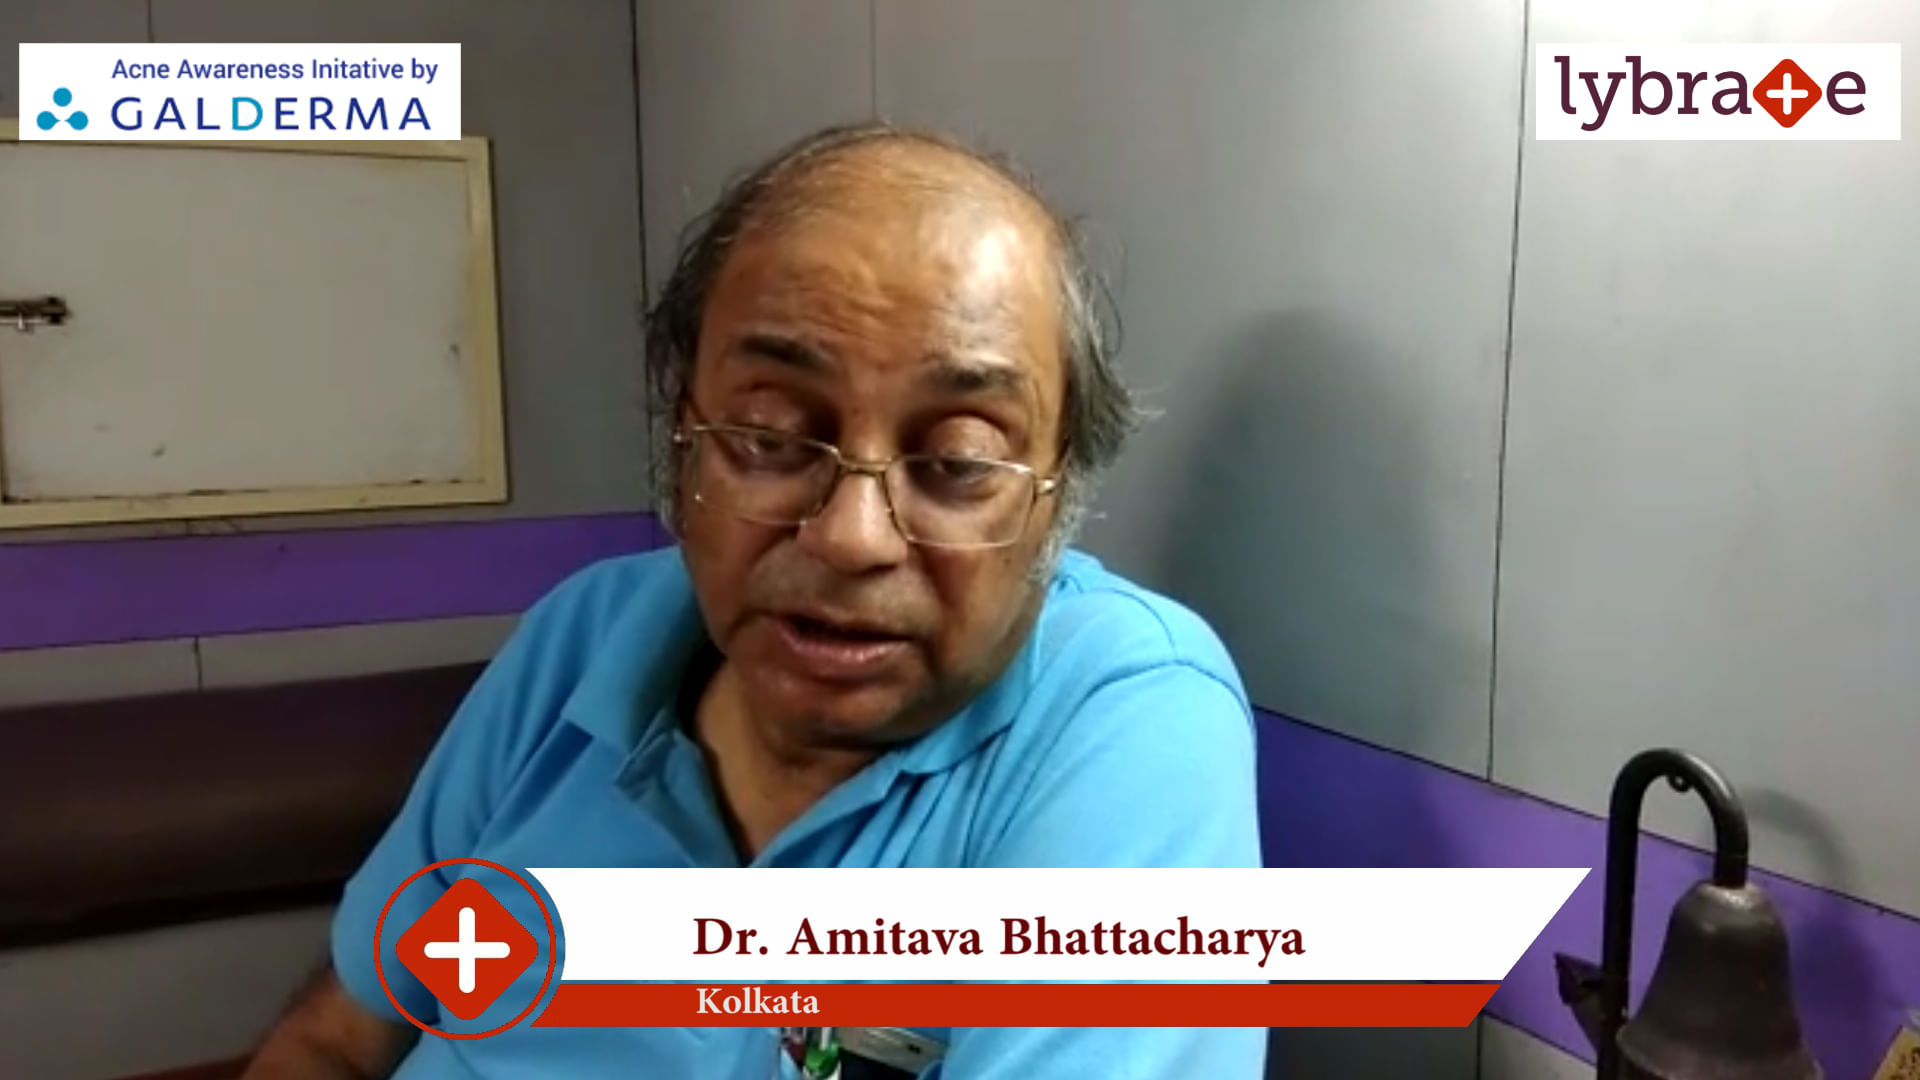 Lybrate | Dr. Amitava Bhattacharya  speaks on IMPORTANCE OF TREATING ACNE EARLY